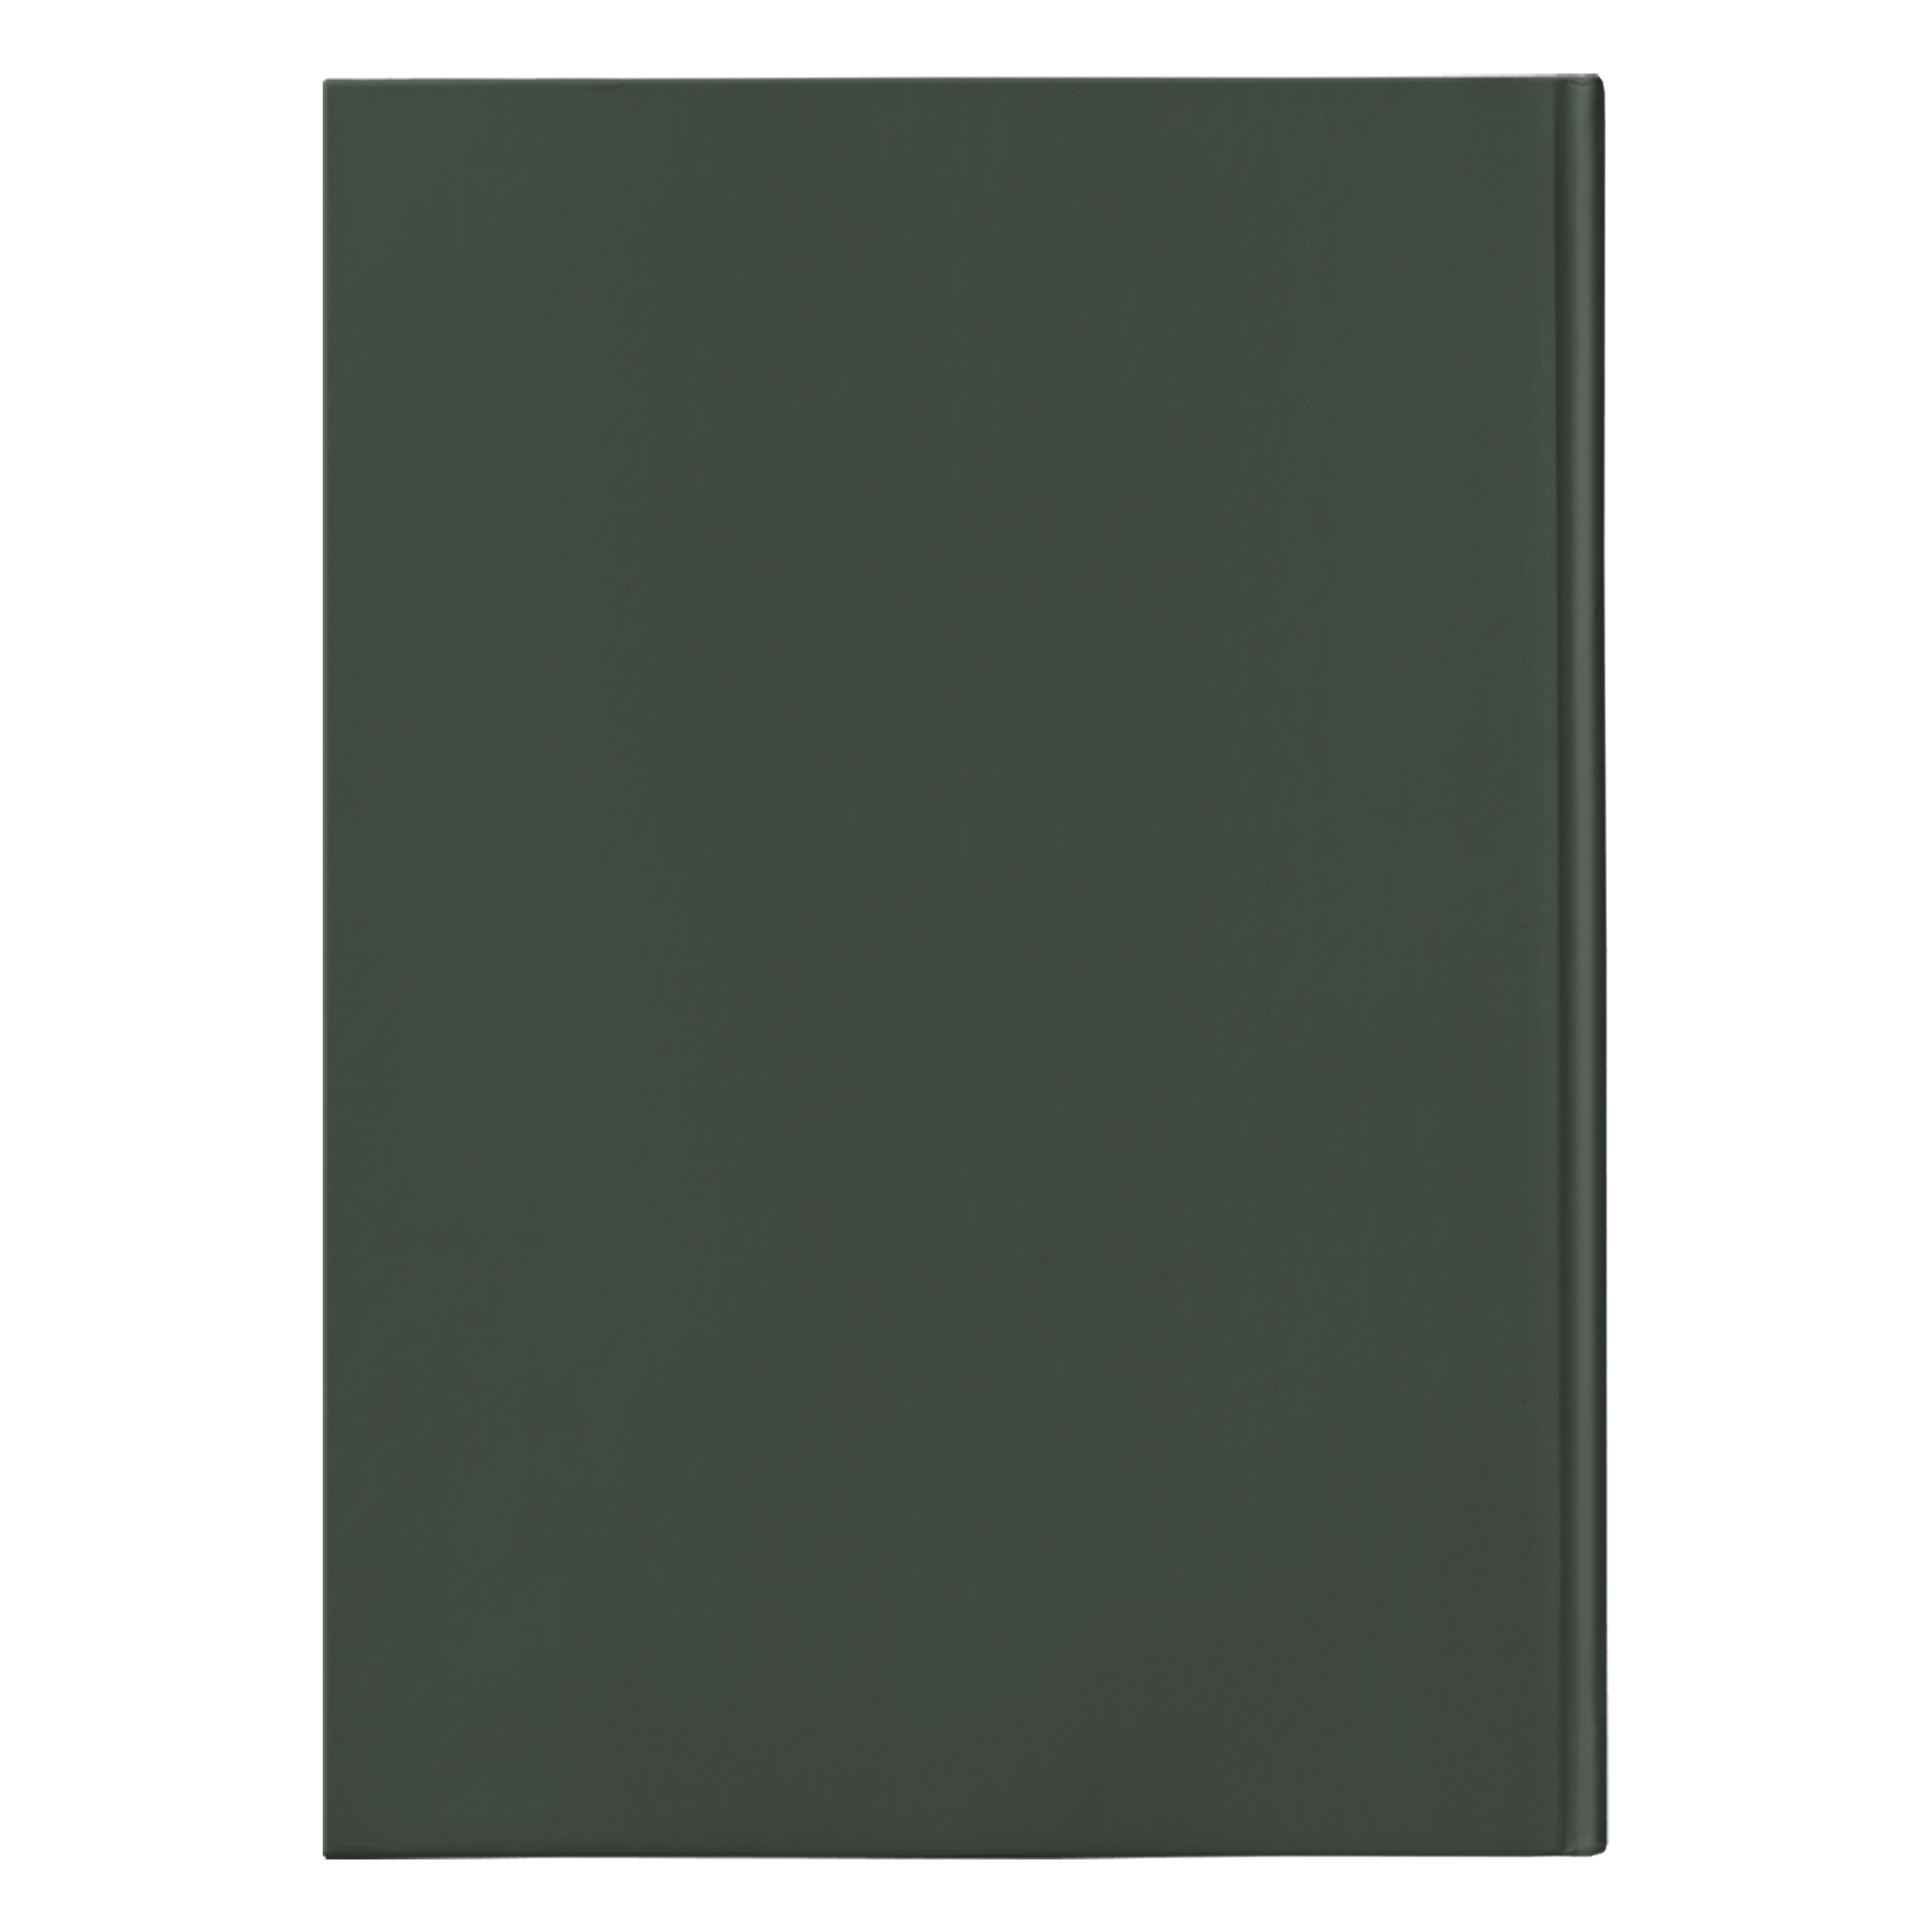 Doctrines of Grace (150 page Hardcover Journal) - SDG Clothing